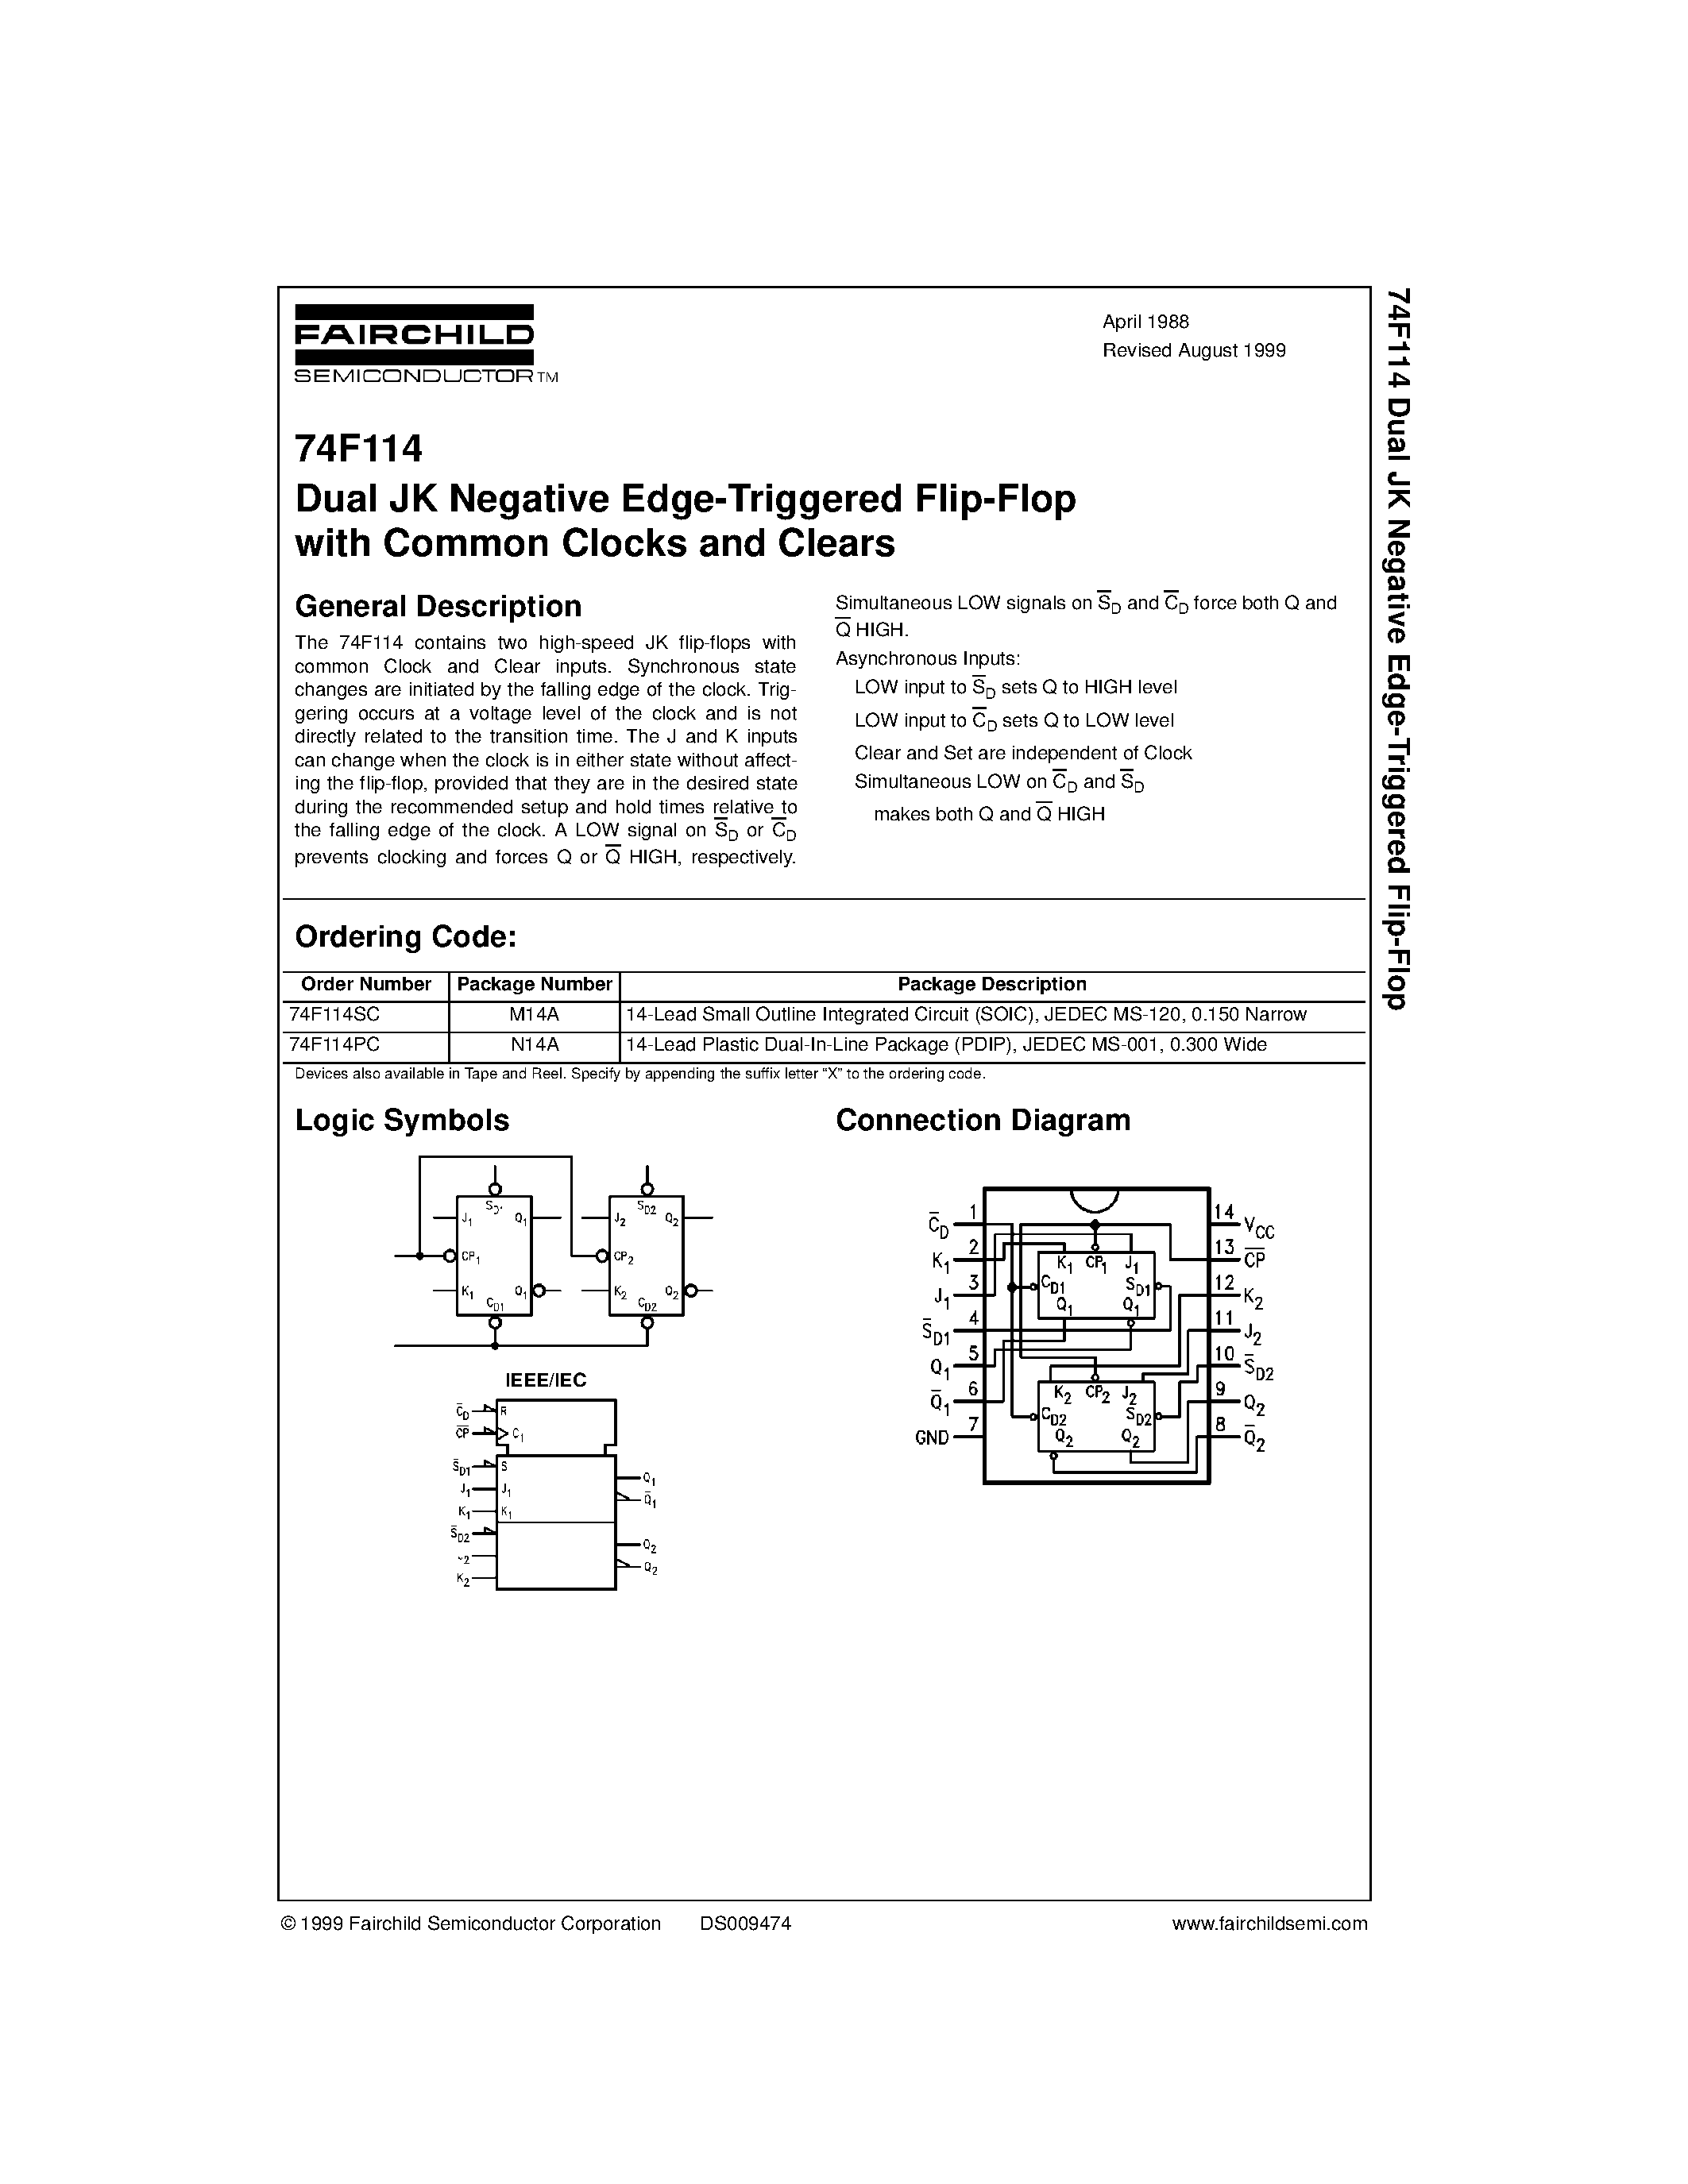 Datasheet 74F114PC - Dual JK Negative Edge-Triggered Flip-Flop with Common Clocks and Clears page 1